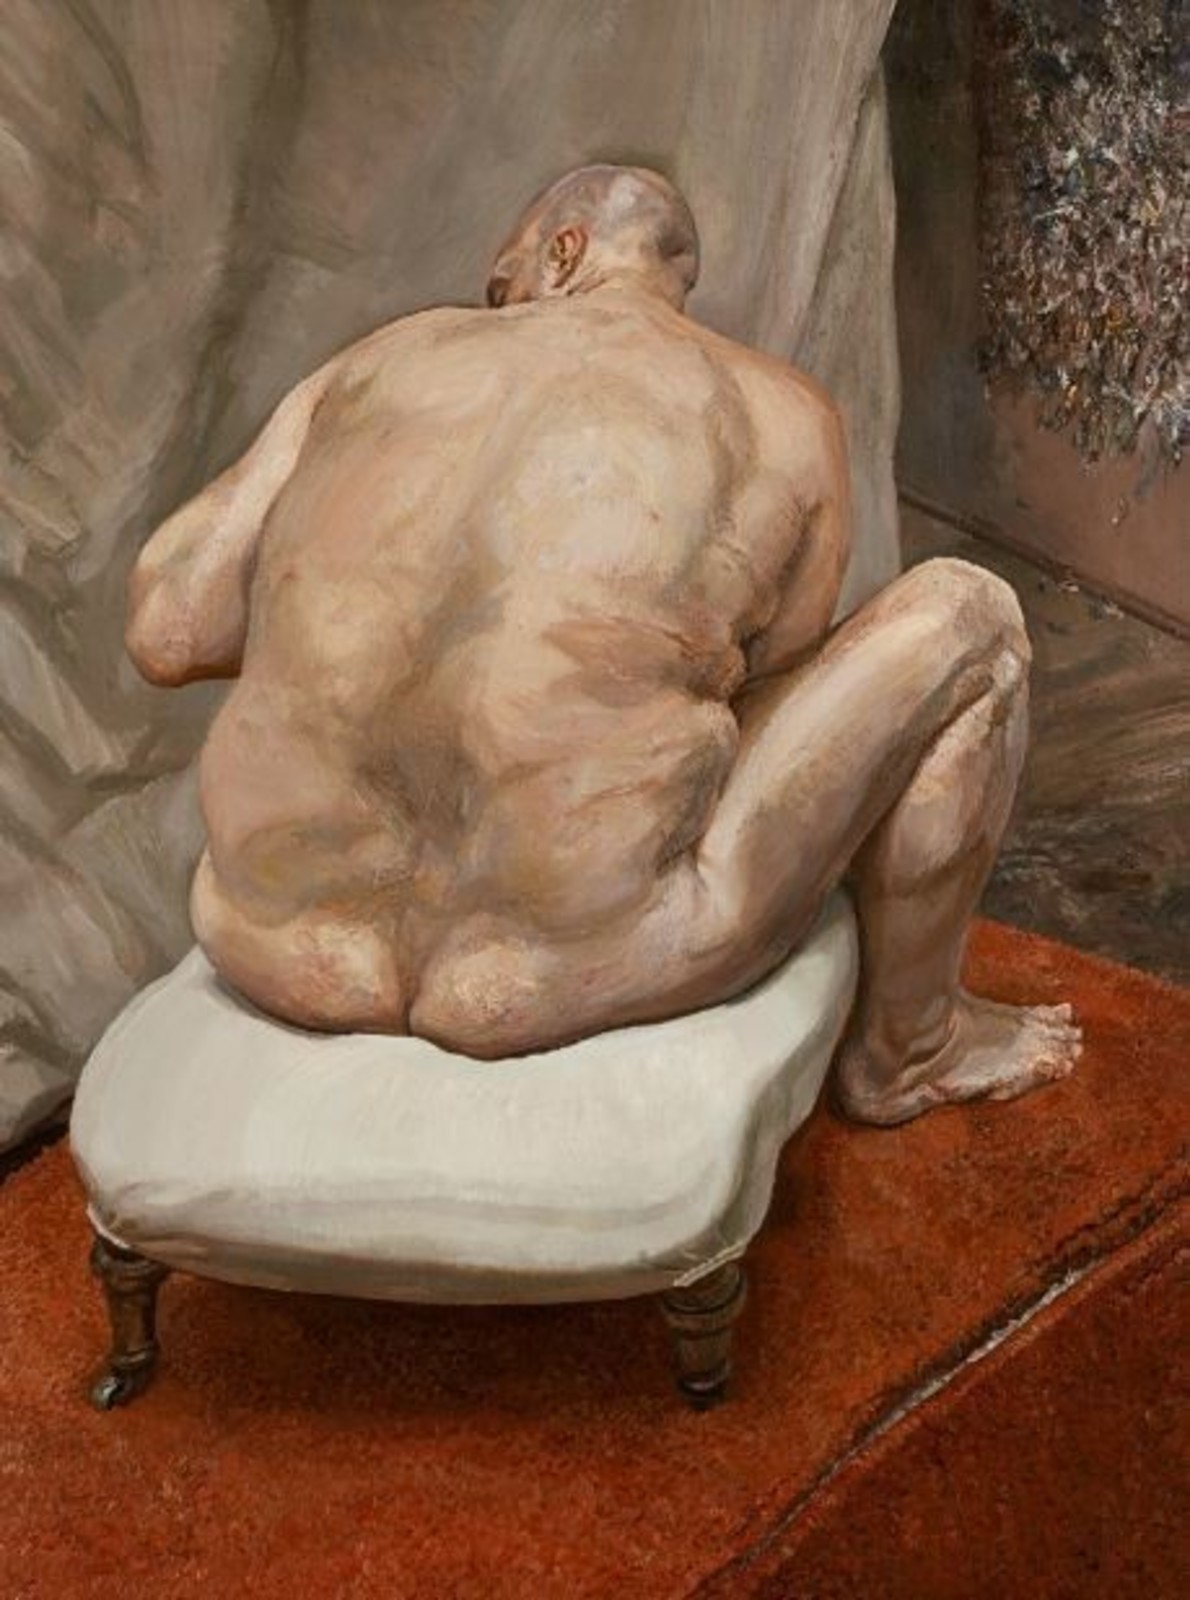 Lucian Freud. Naked Man, Back View. 1991-1992. Oil on canvas. 183.5 x 137.5 cm. Metropolitan Museum of Art (New York City, United States).